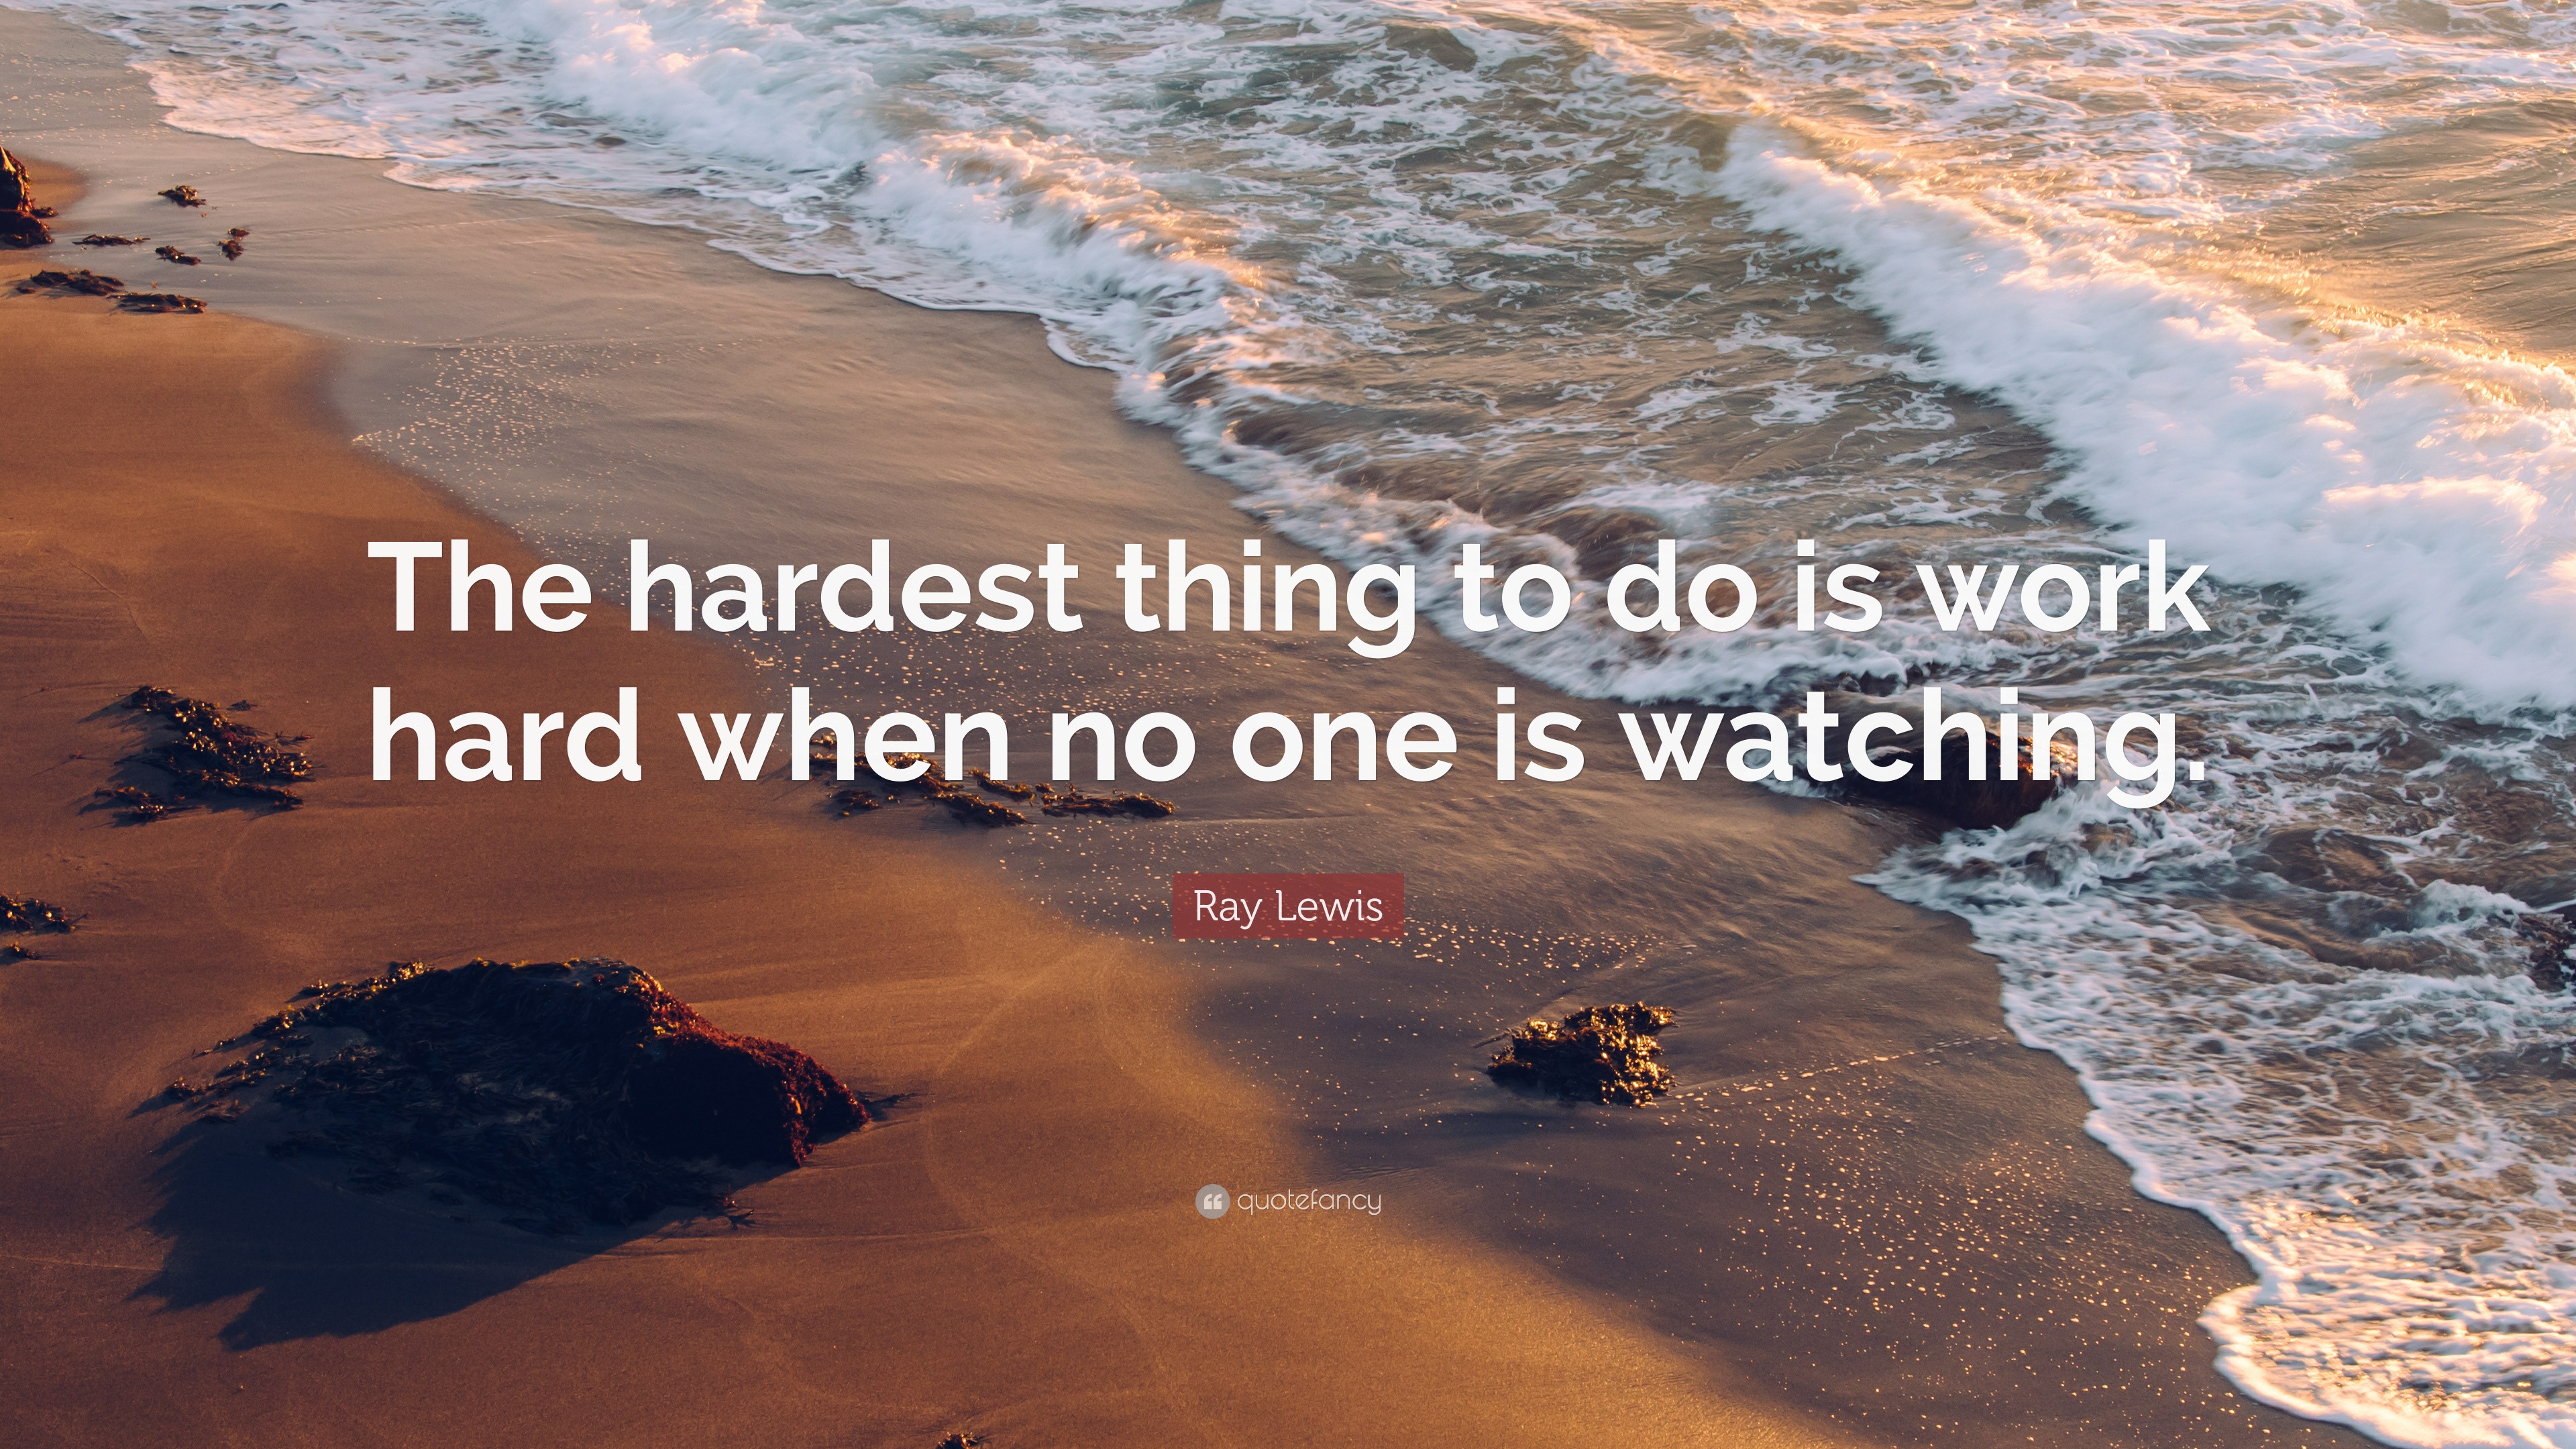 Ray Lewis Quote: “The hardest thing to do is work hard when no one is